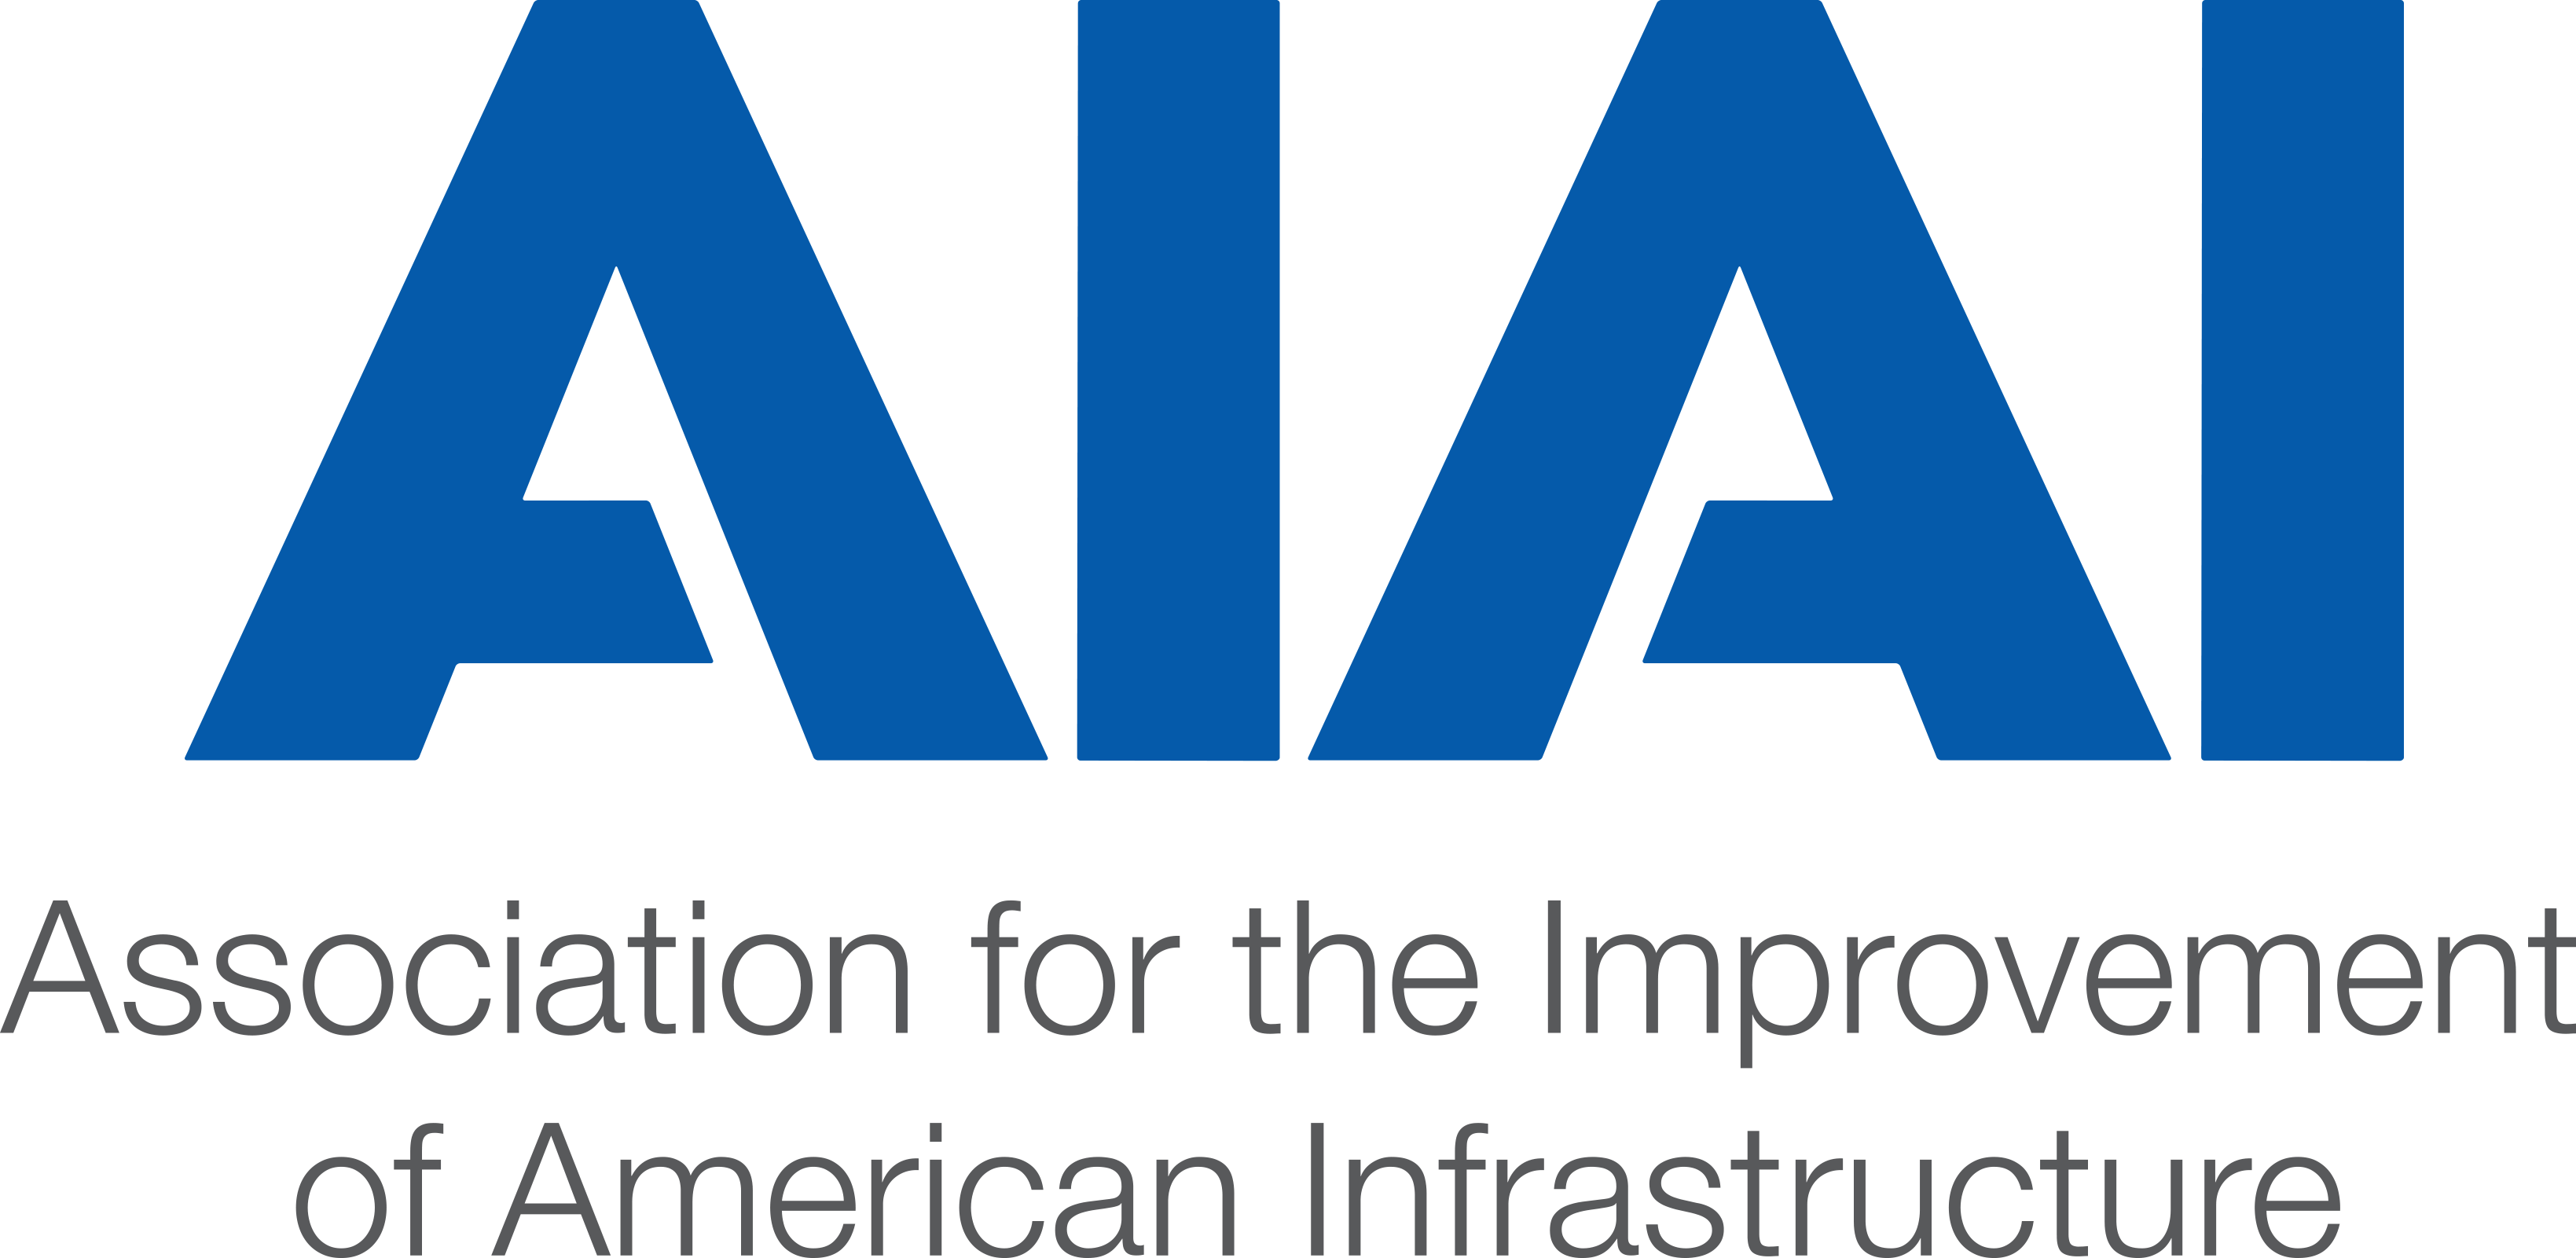 Association for the Improvement of American Infrastructure (AIAI)